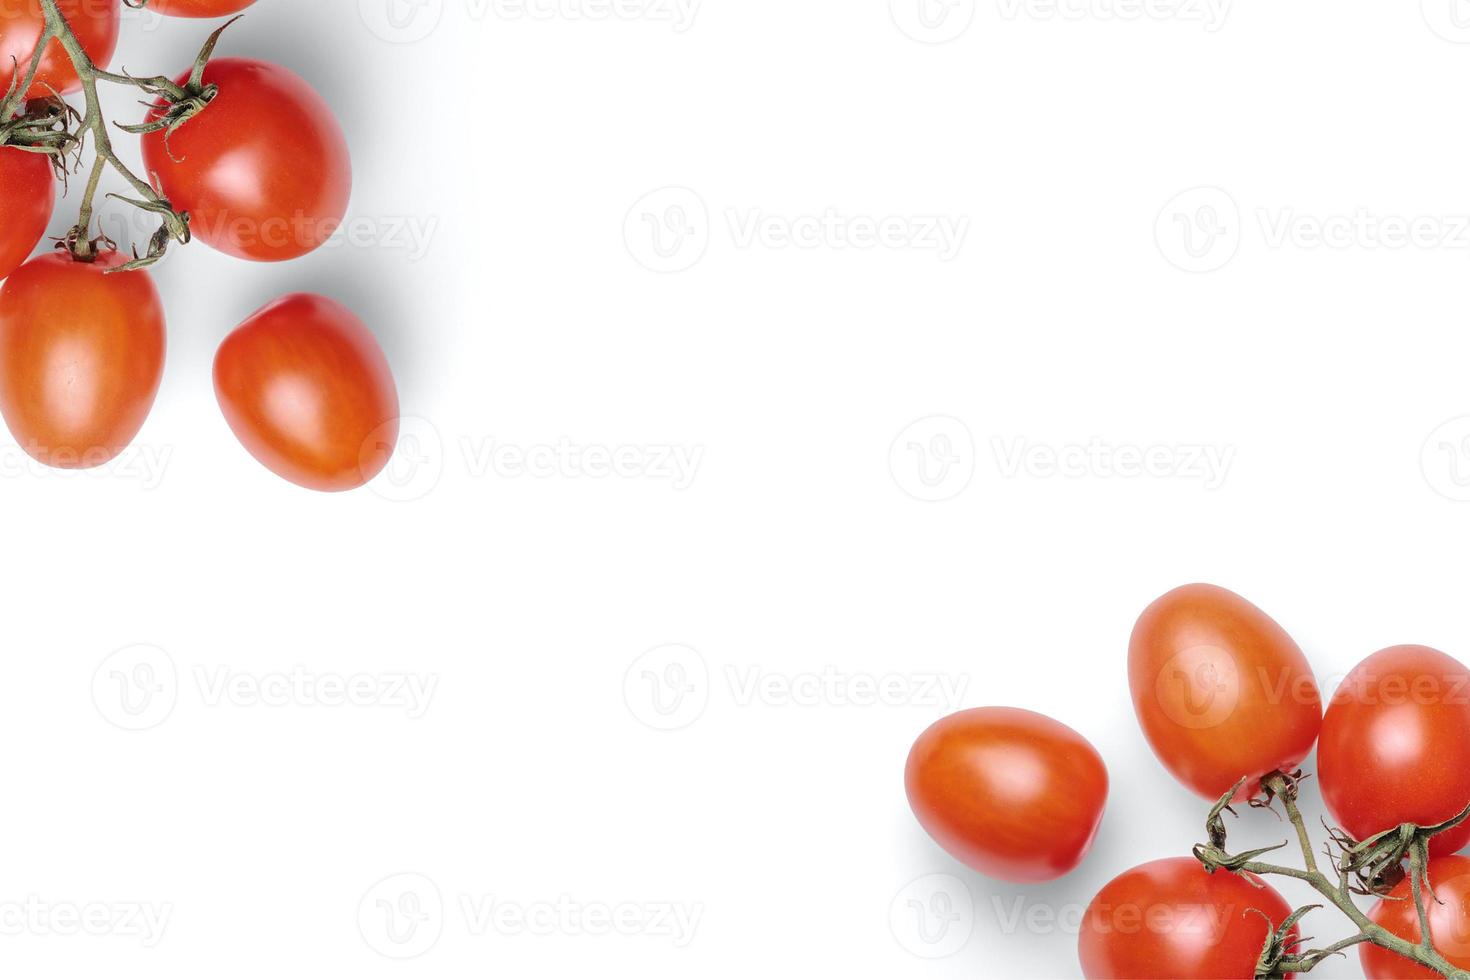 Tomato background, food background, fruit and vegetable background with copy space for text, fresh food ingredients for cooking, top view with copy space, food advertising banner photo